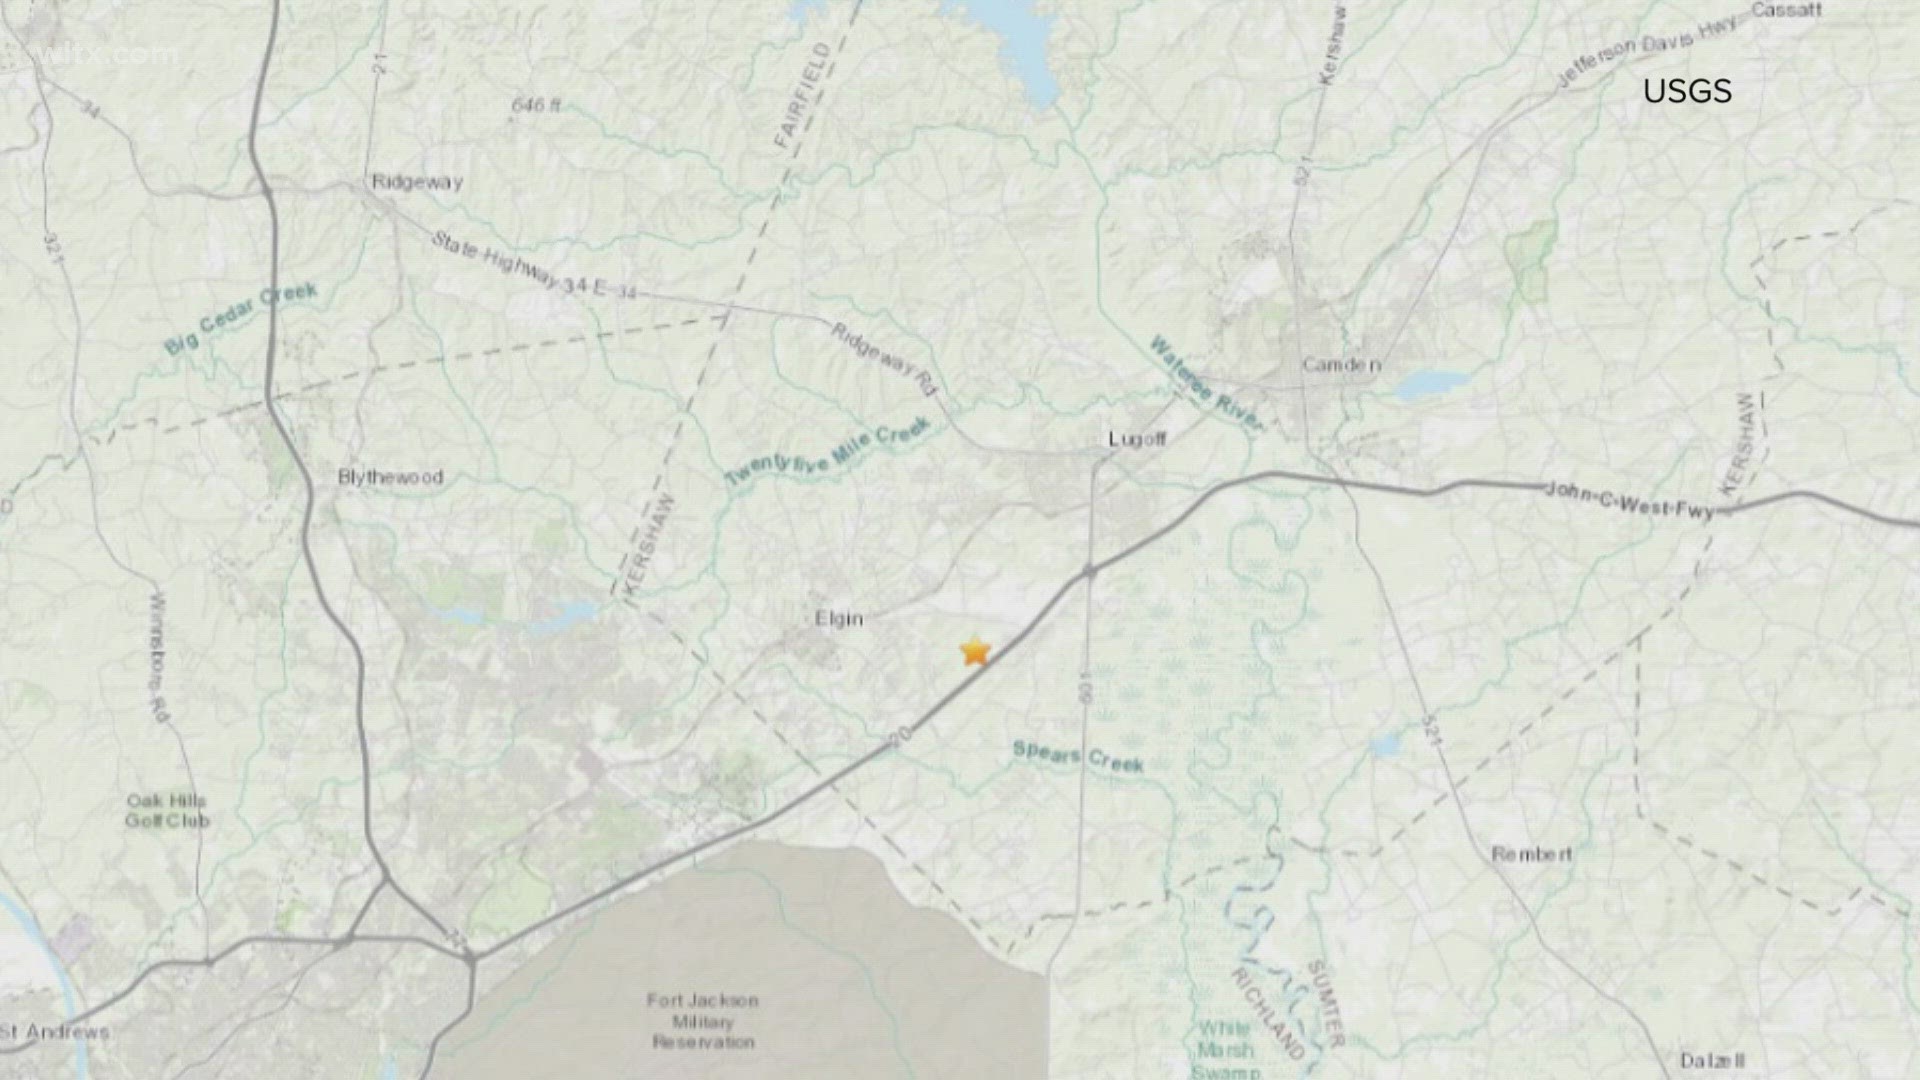 Hundreds of residents in the area have already reported feeling the quake, according to the U.S. Geological Survey.